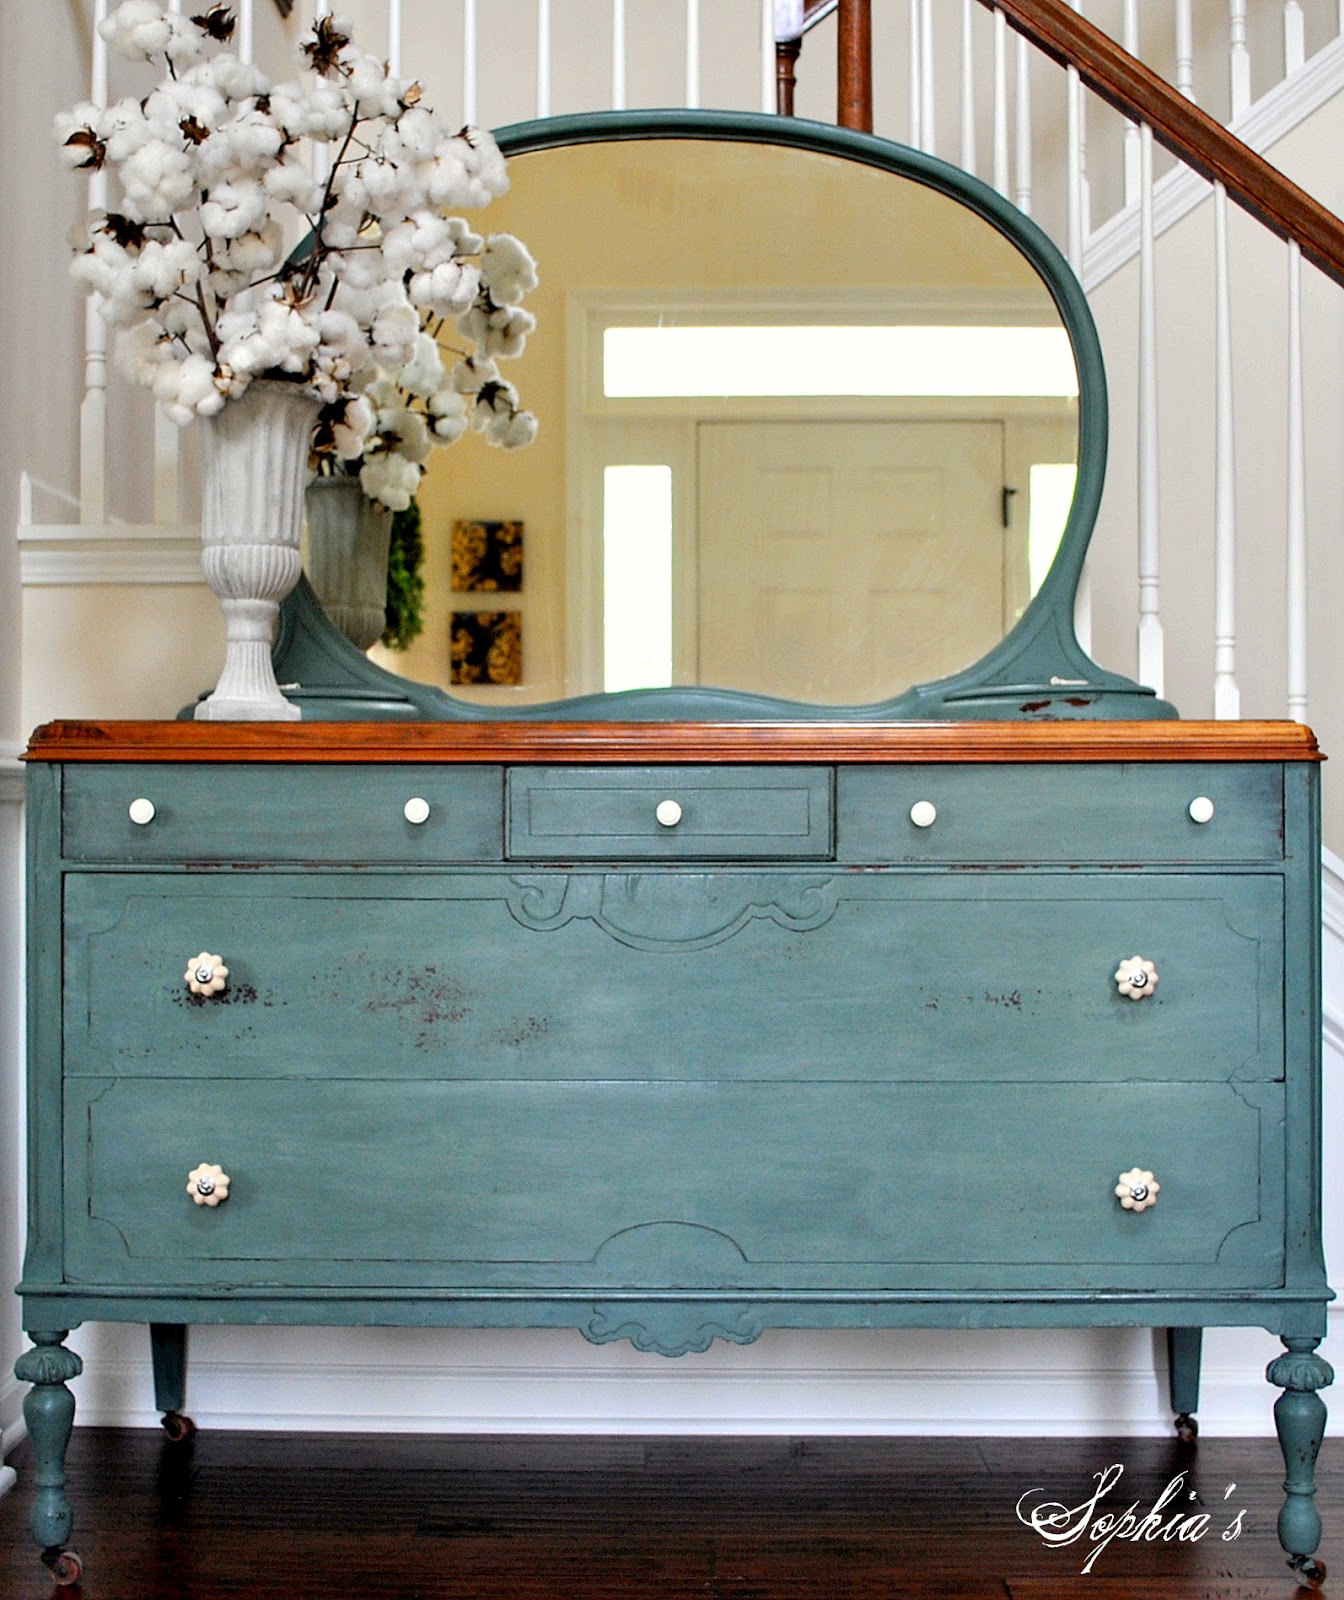 Sophia's: An Antique Bed, Furniture Facelifts and a Blog Hop Party!